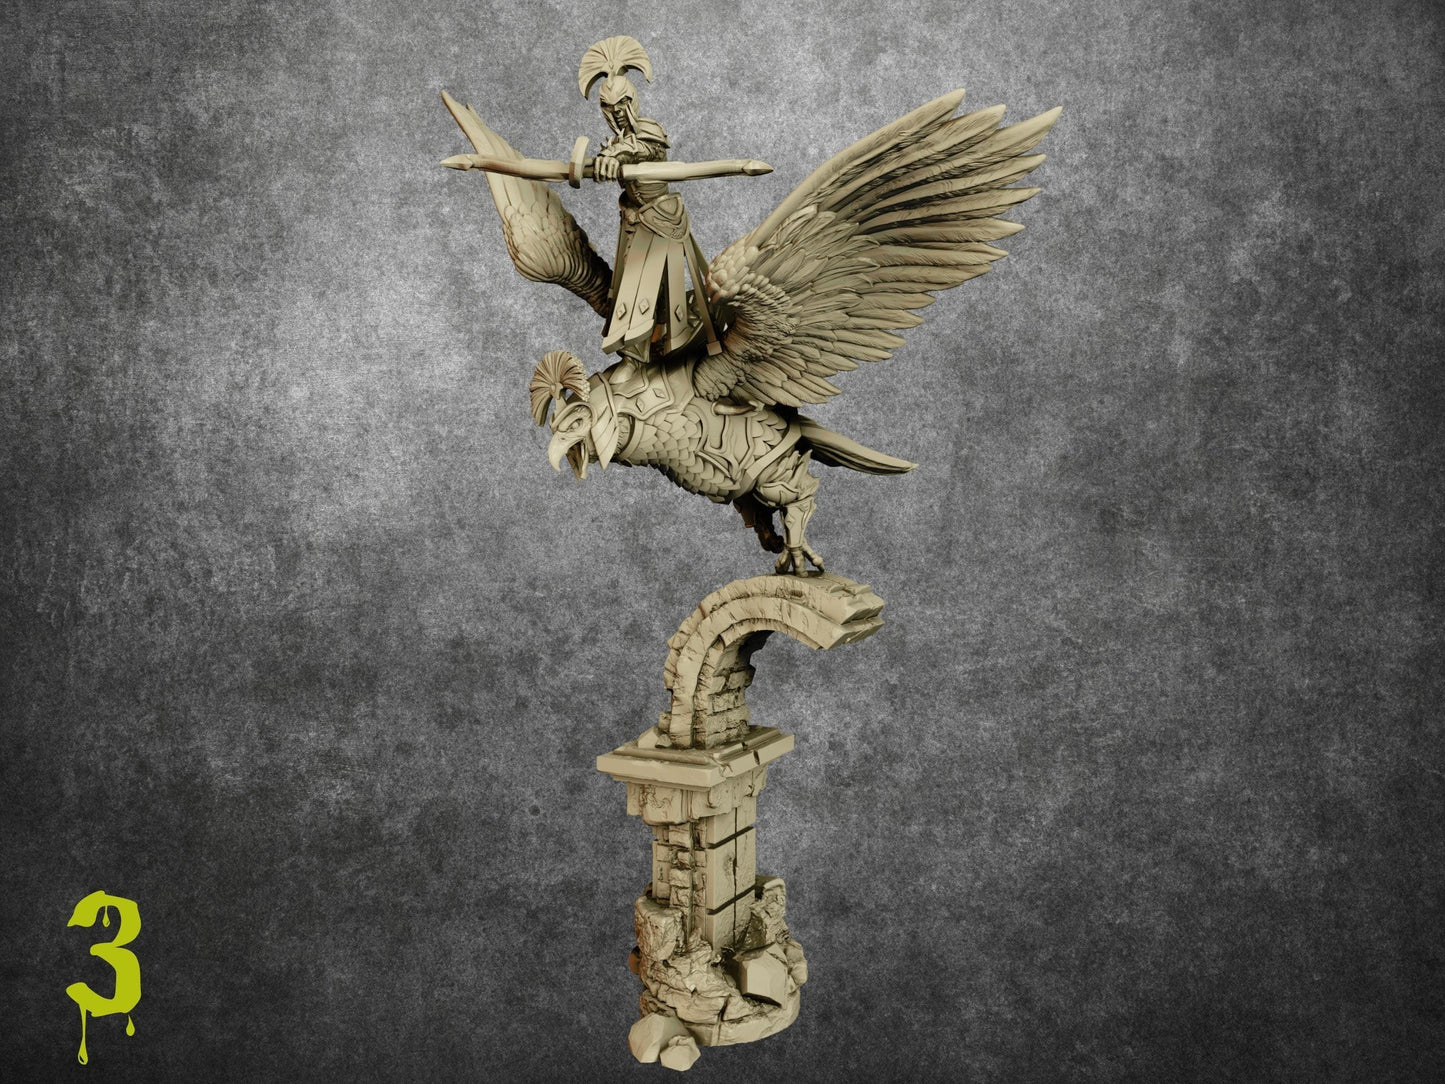 Elf Eagle Rider Miniature - 32mm scale Tabletop gaming DnD Miniature Dungeons and Dragons,elf archer ranger dnd 5e - Plague Miniatures shop for DnD Miniatures